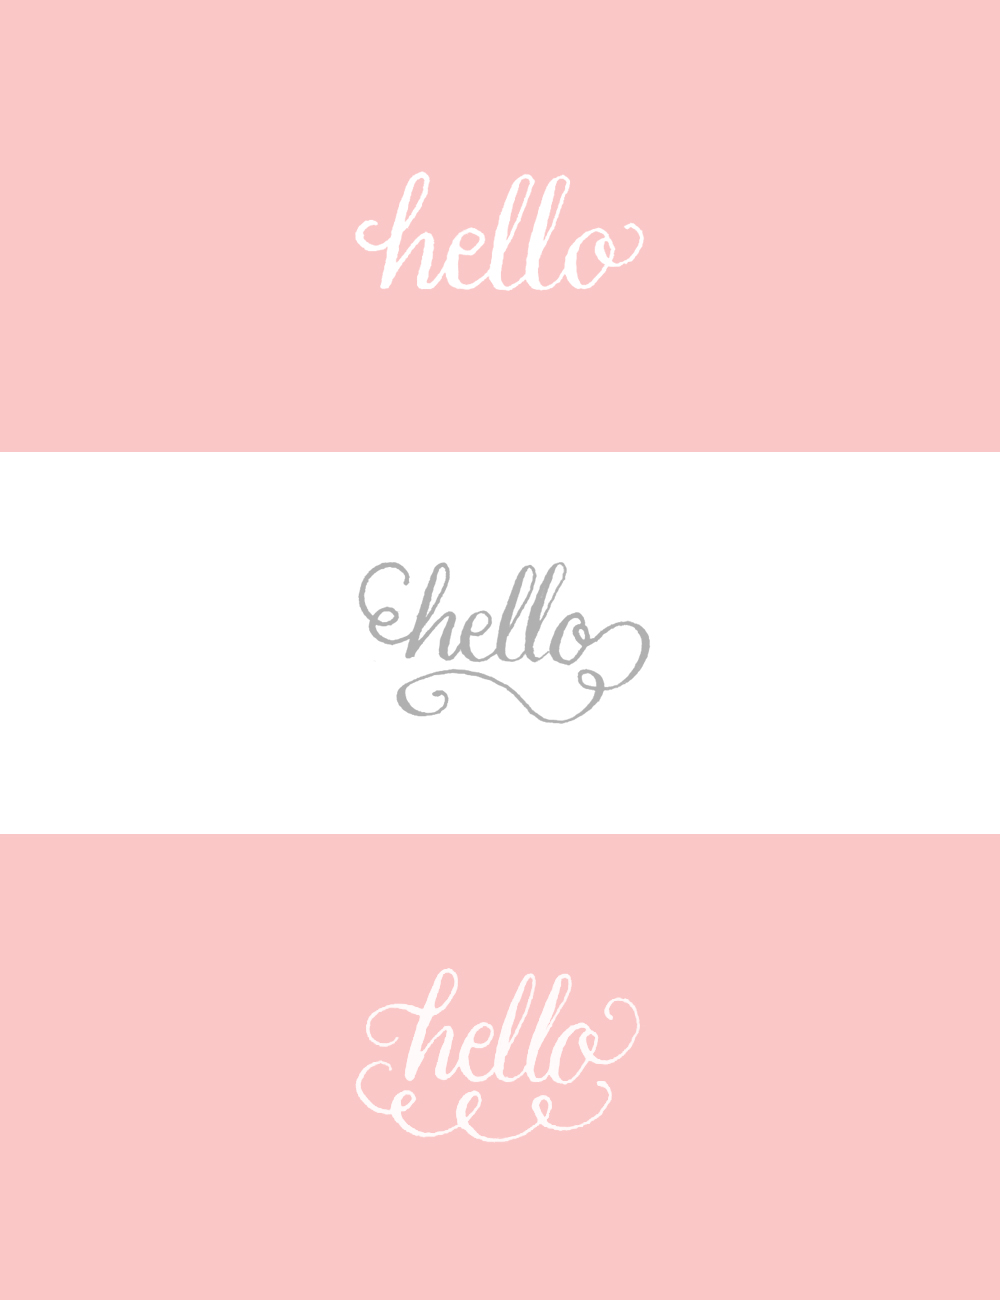 Hello Photoshop Brushes via Happy Hands Project